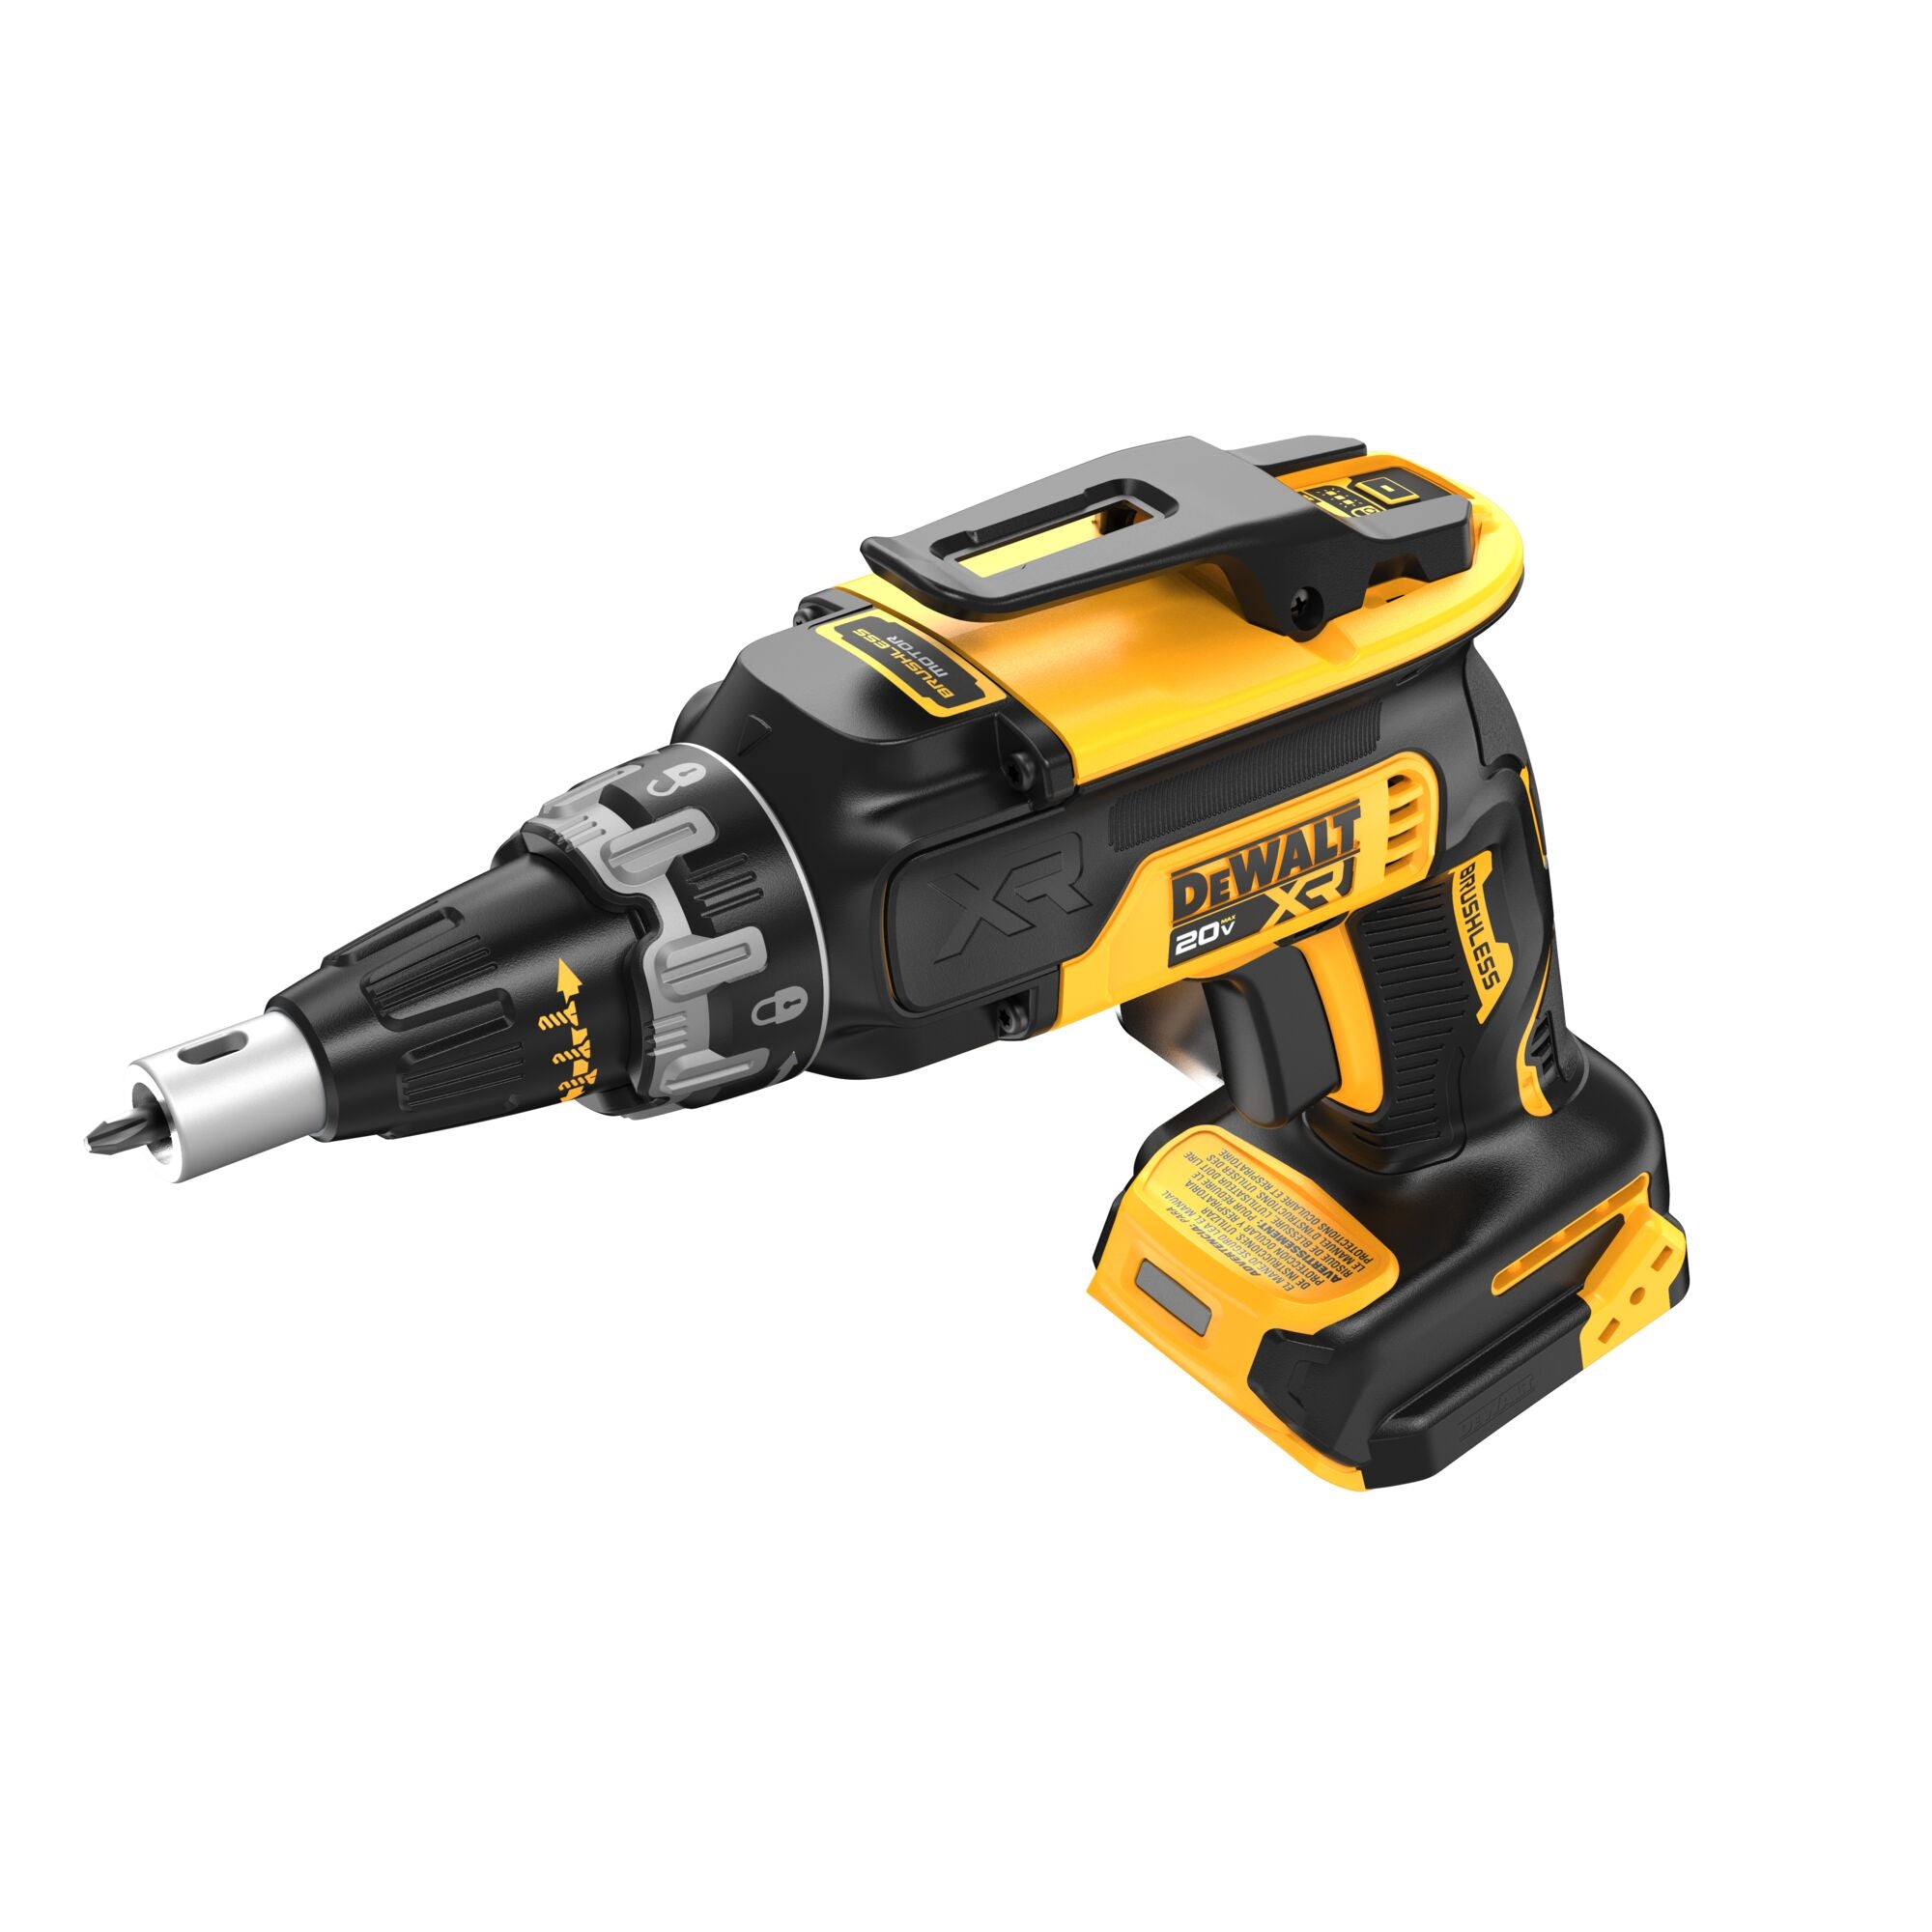 DEWALT DCK265D2 with DCE555DC & DWH161B 20V MAX XR Lithium-Ion Brushless Cordless Drywall Starter Bundle with Drywal Screwgun, Drywall Cut-Out Tool, Dust Shroud Attachment, and 20V MAX Brushless Universal Dust Extractor 2.0 Ah